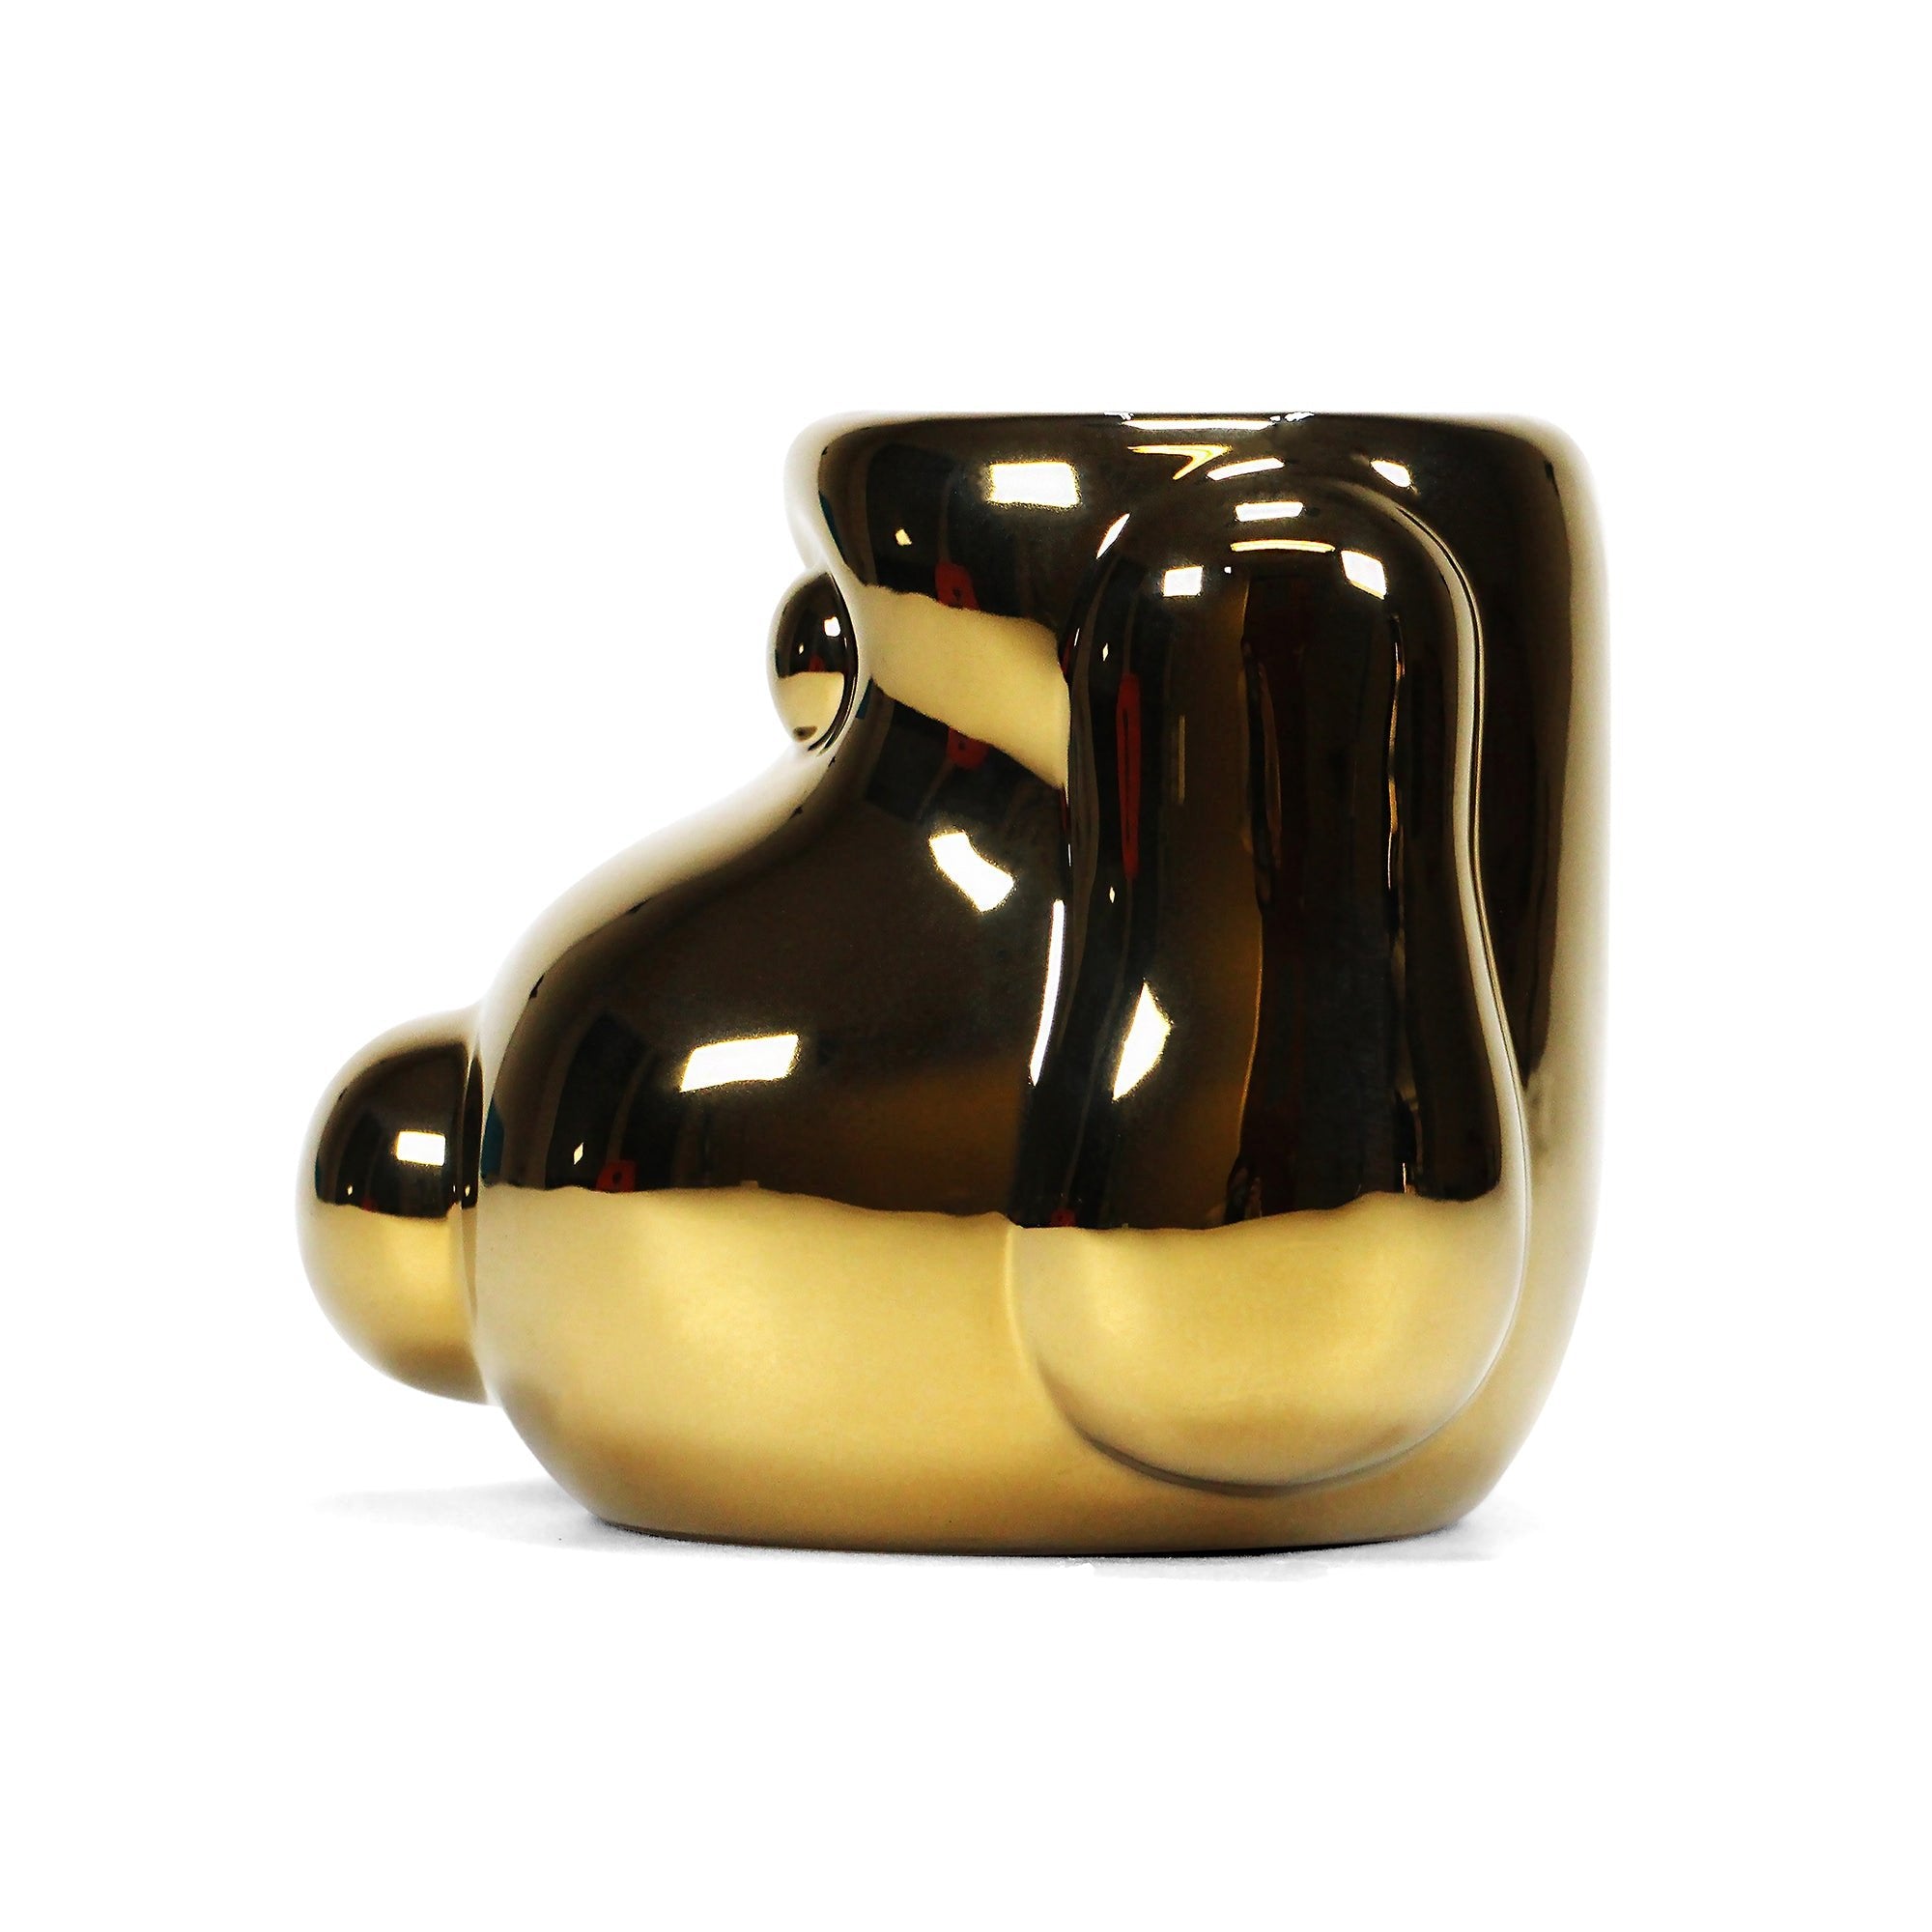 Wallace & Gromit Special Edition Shaped Mug - Gold Gromit